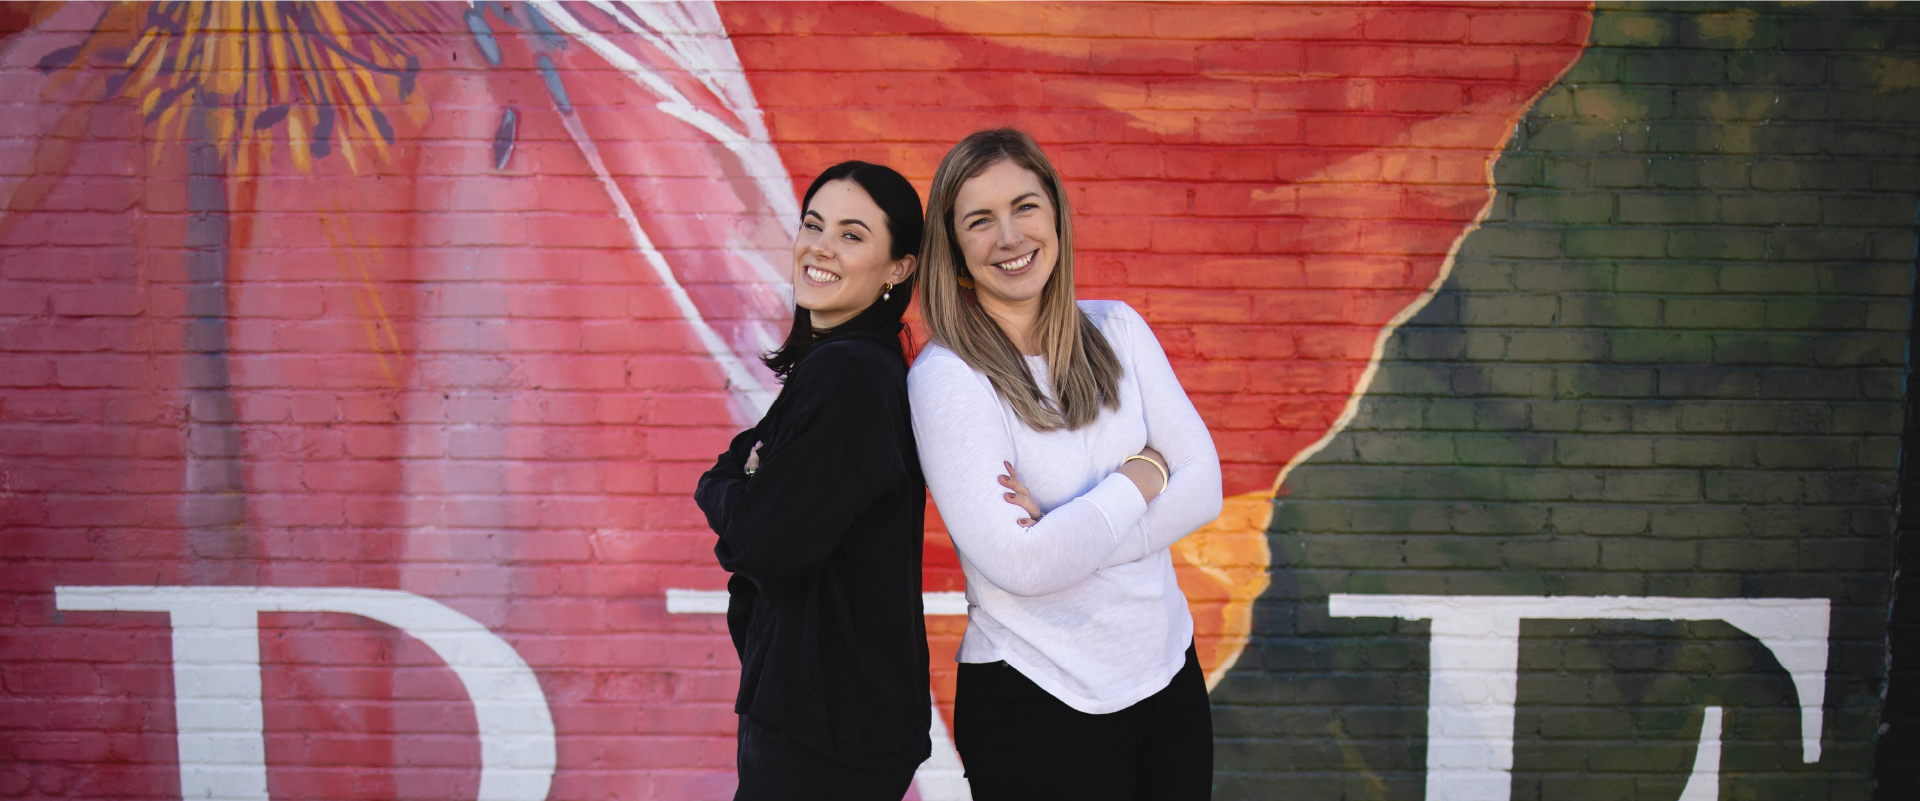 Two women standing back to back smiling with arms cross in front of a mural.